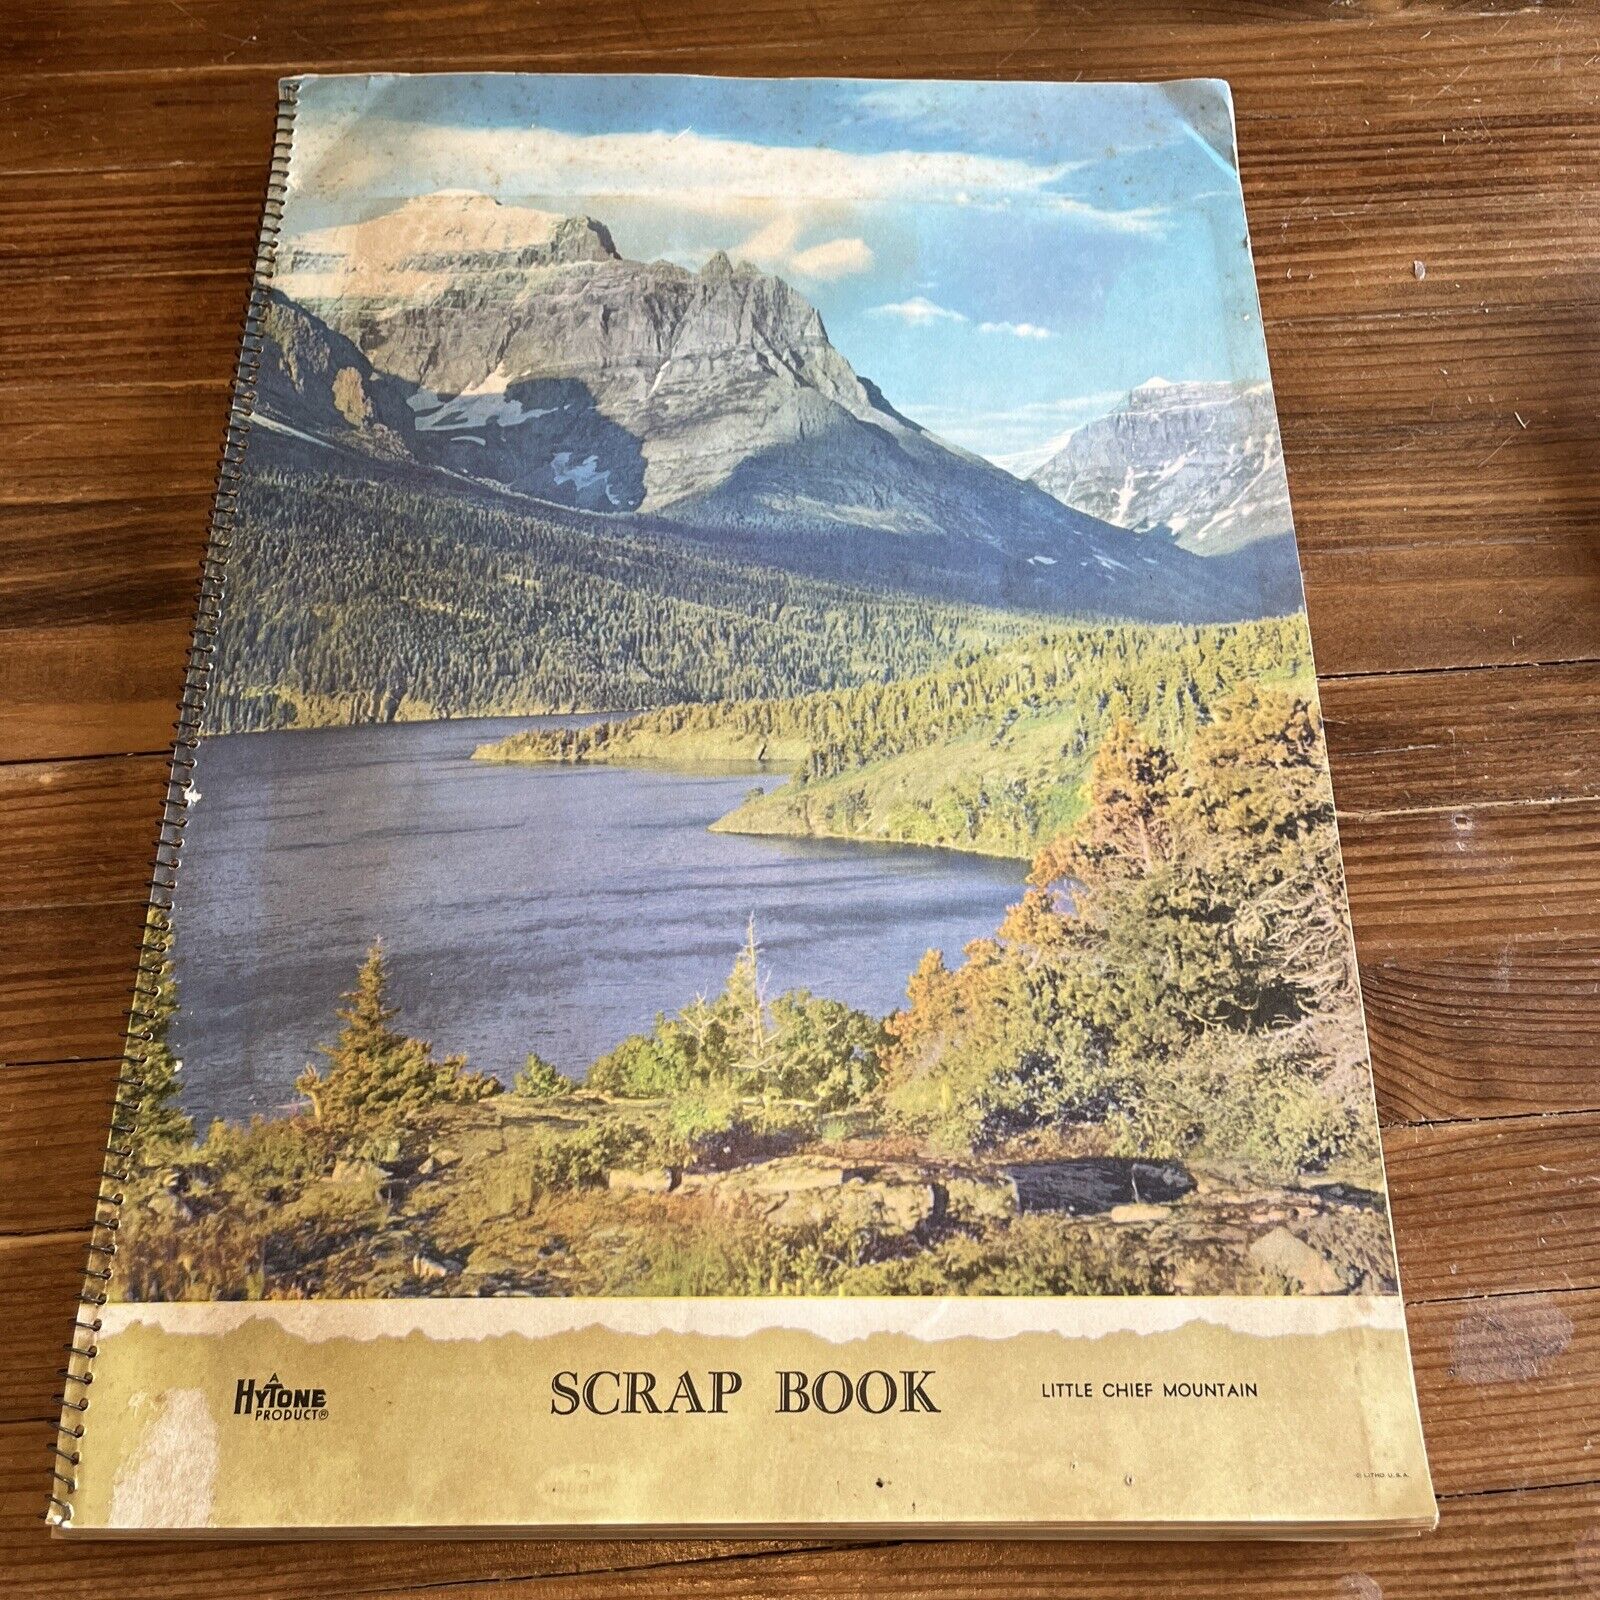 Vintage Scrapbook Large 15”x11” Little Chief Mountain On Cover Full Of Ephemera 